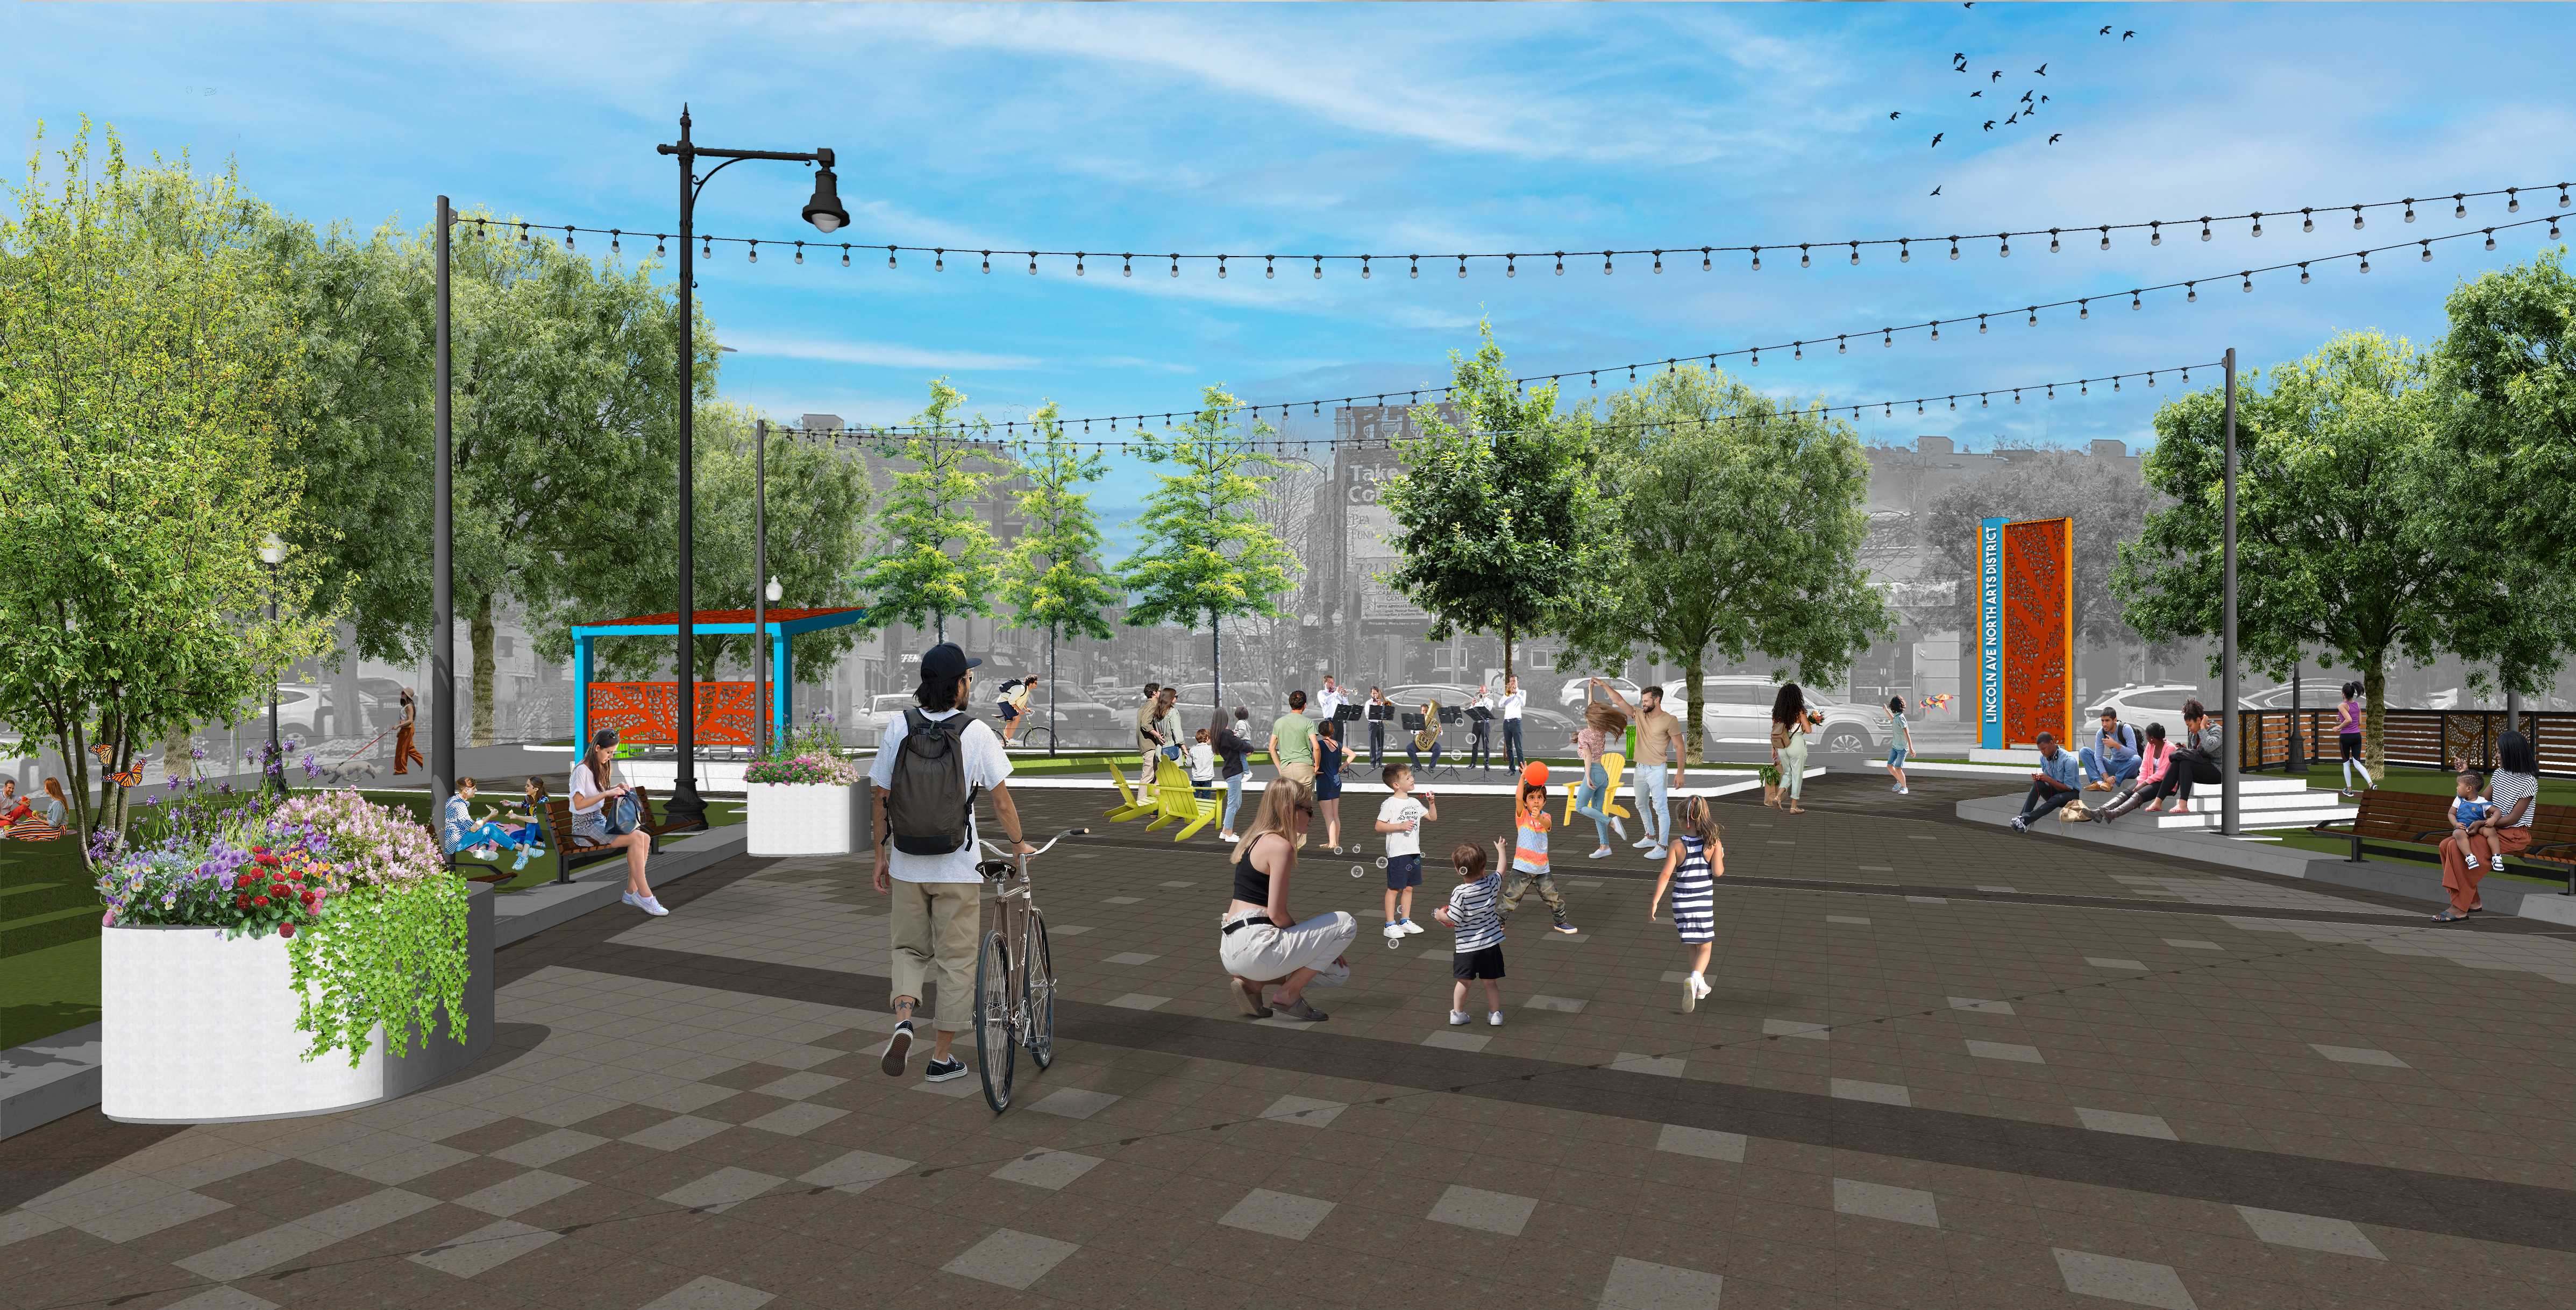 Rendering of People Gathered in Completed Ainslie Arts Plaza 